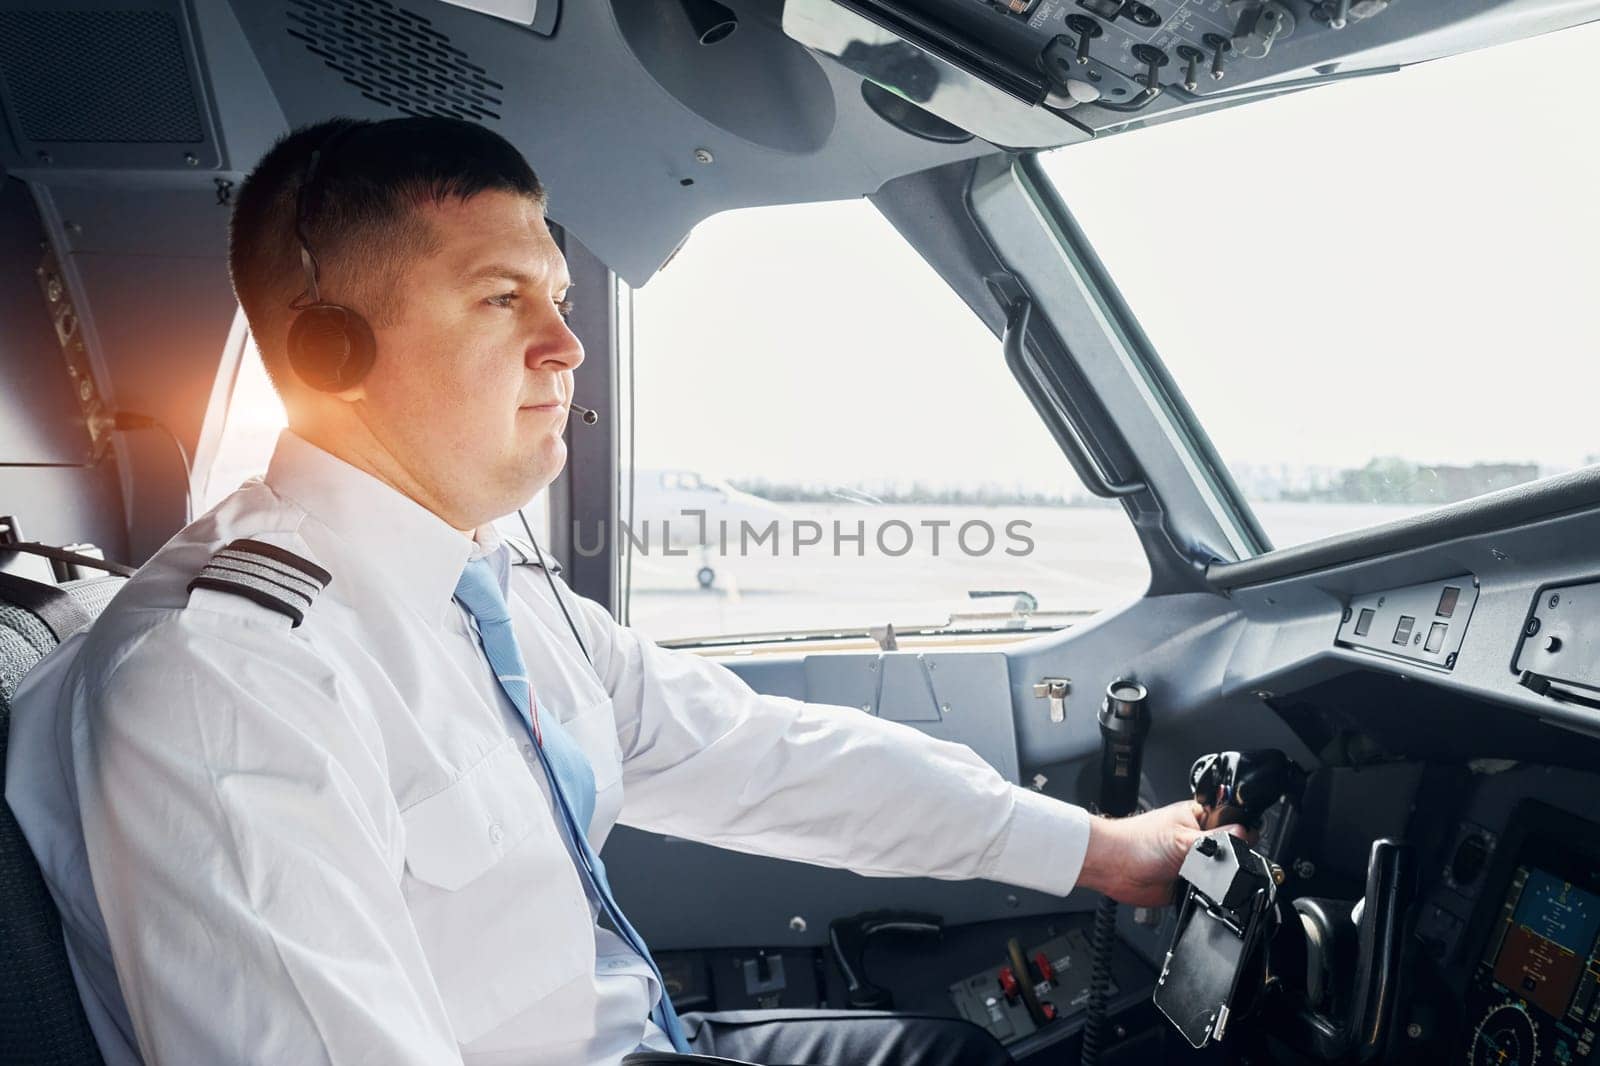 Side view. Pilot in formal wear sits in the cockpit and controls airplane.